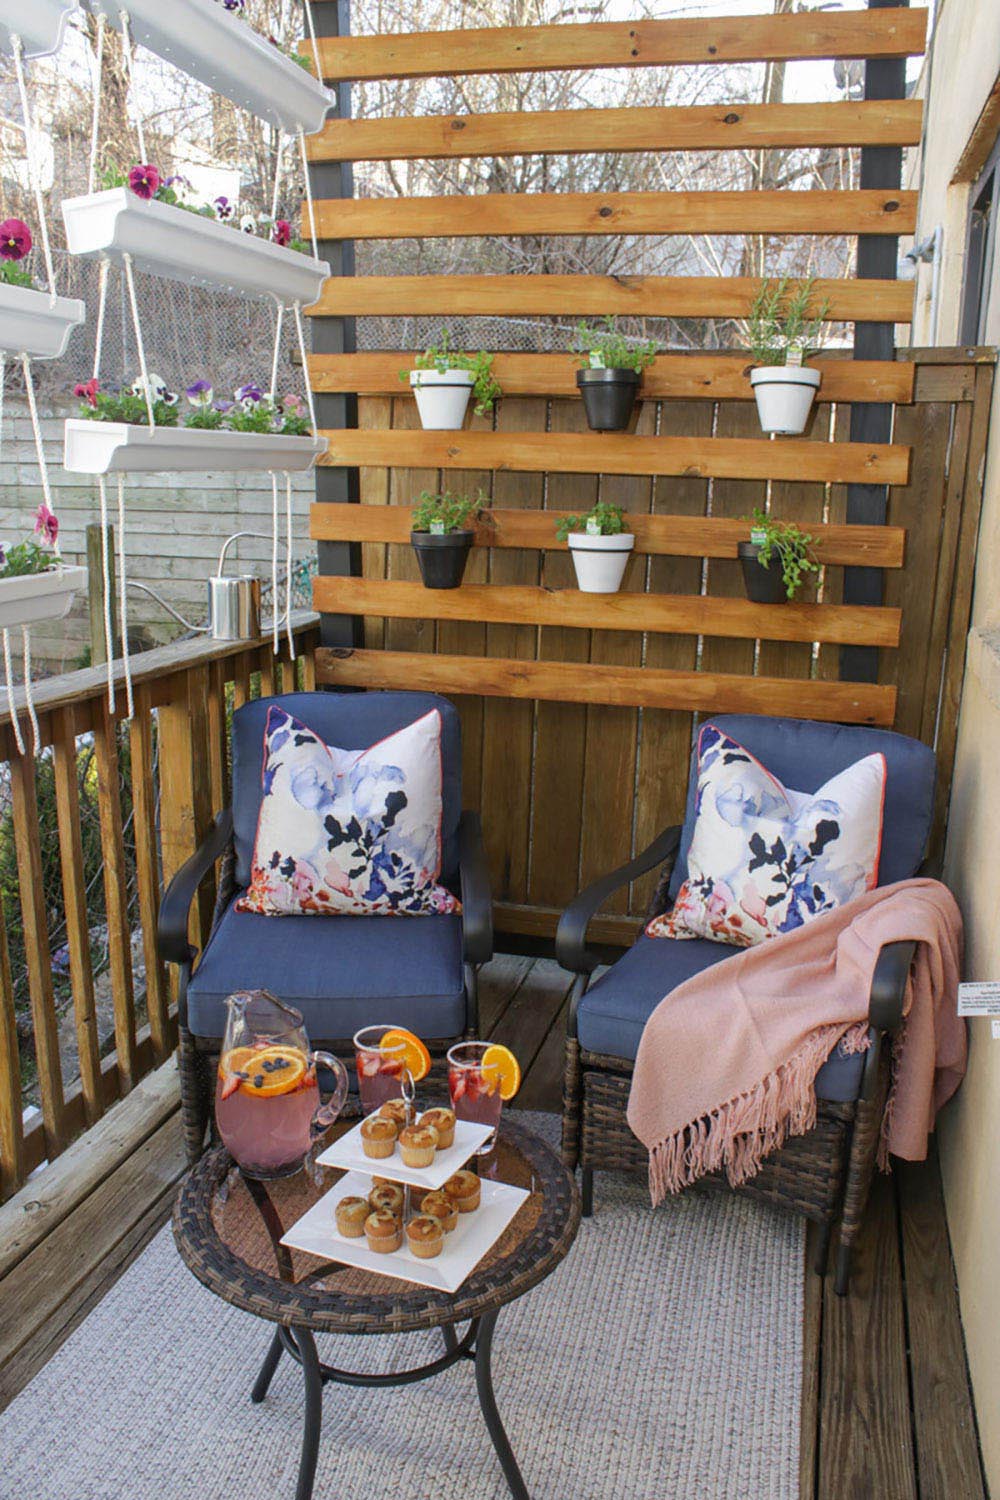 A wooden wall planter behind two patio chairs.